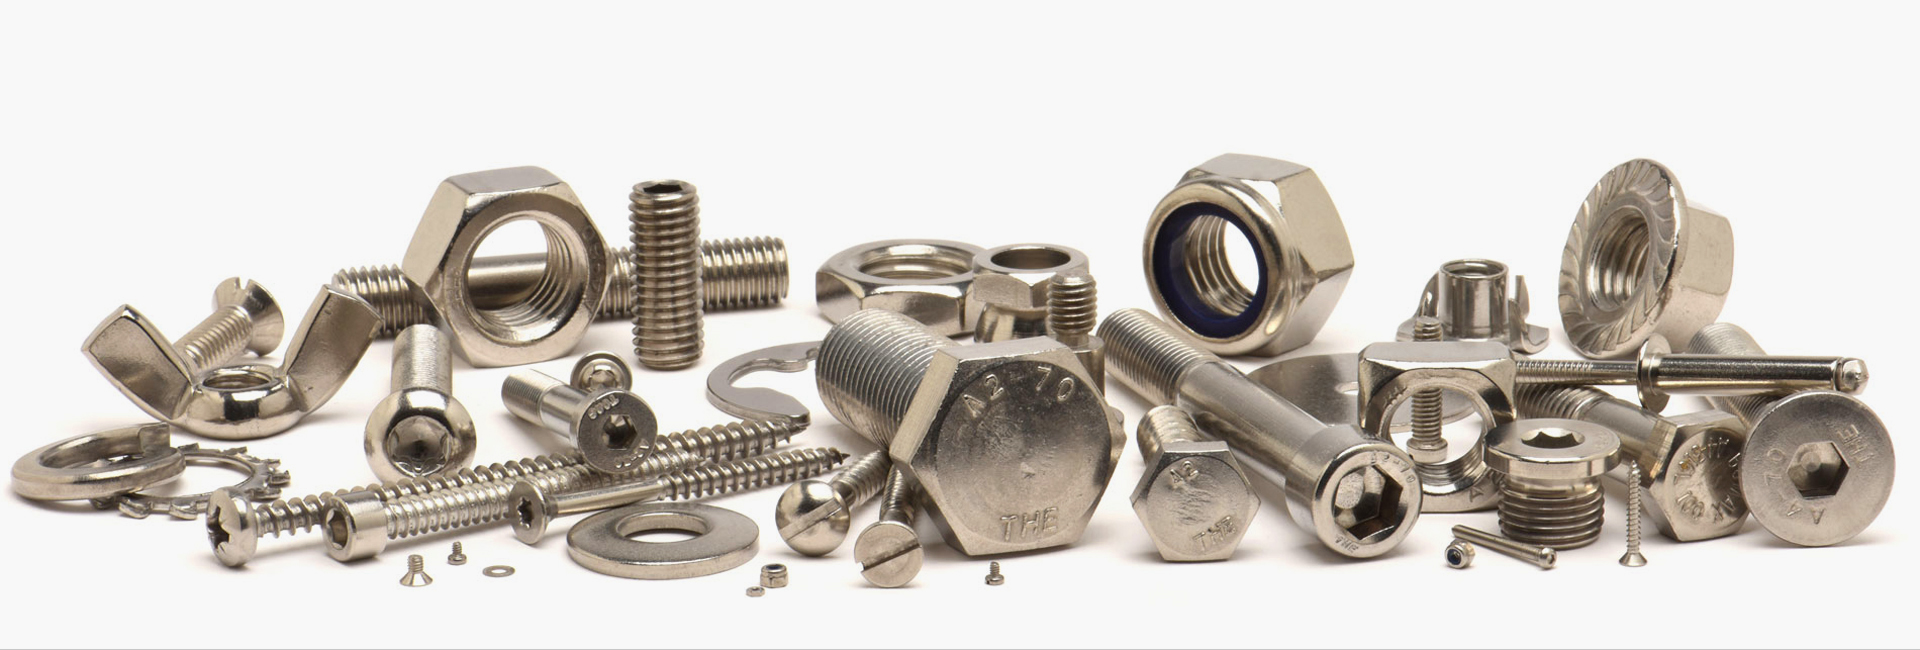                                 Stainless Steel Fasteners Supplier